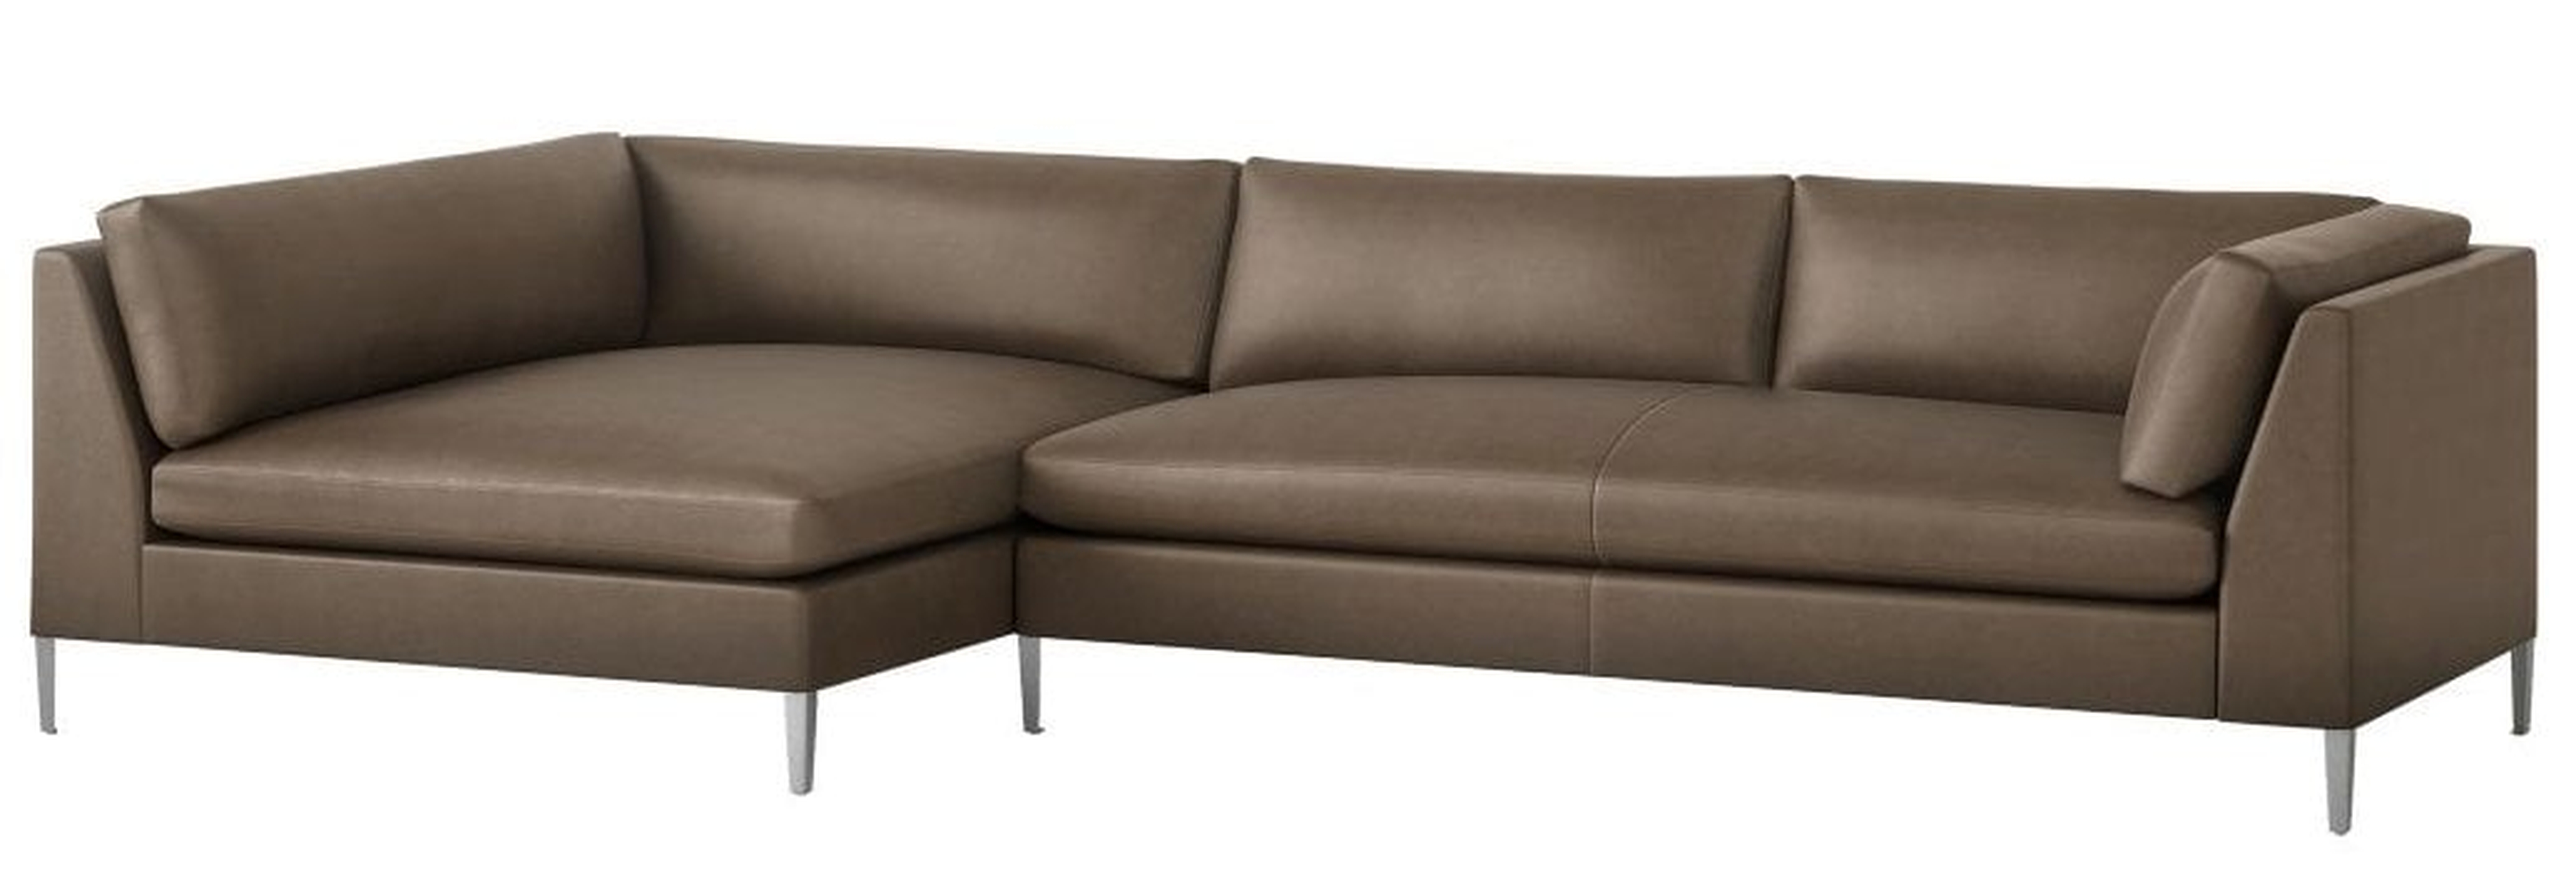 Decker 2-Piece Leather Sectional Sofa Whincherster Dove - CB2